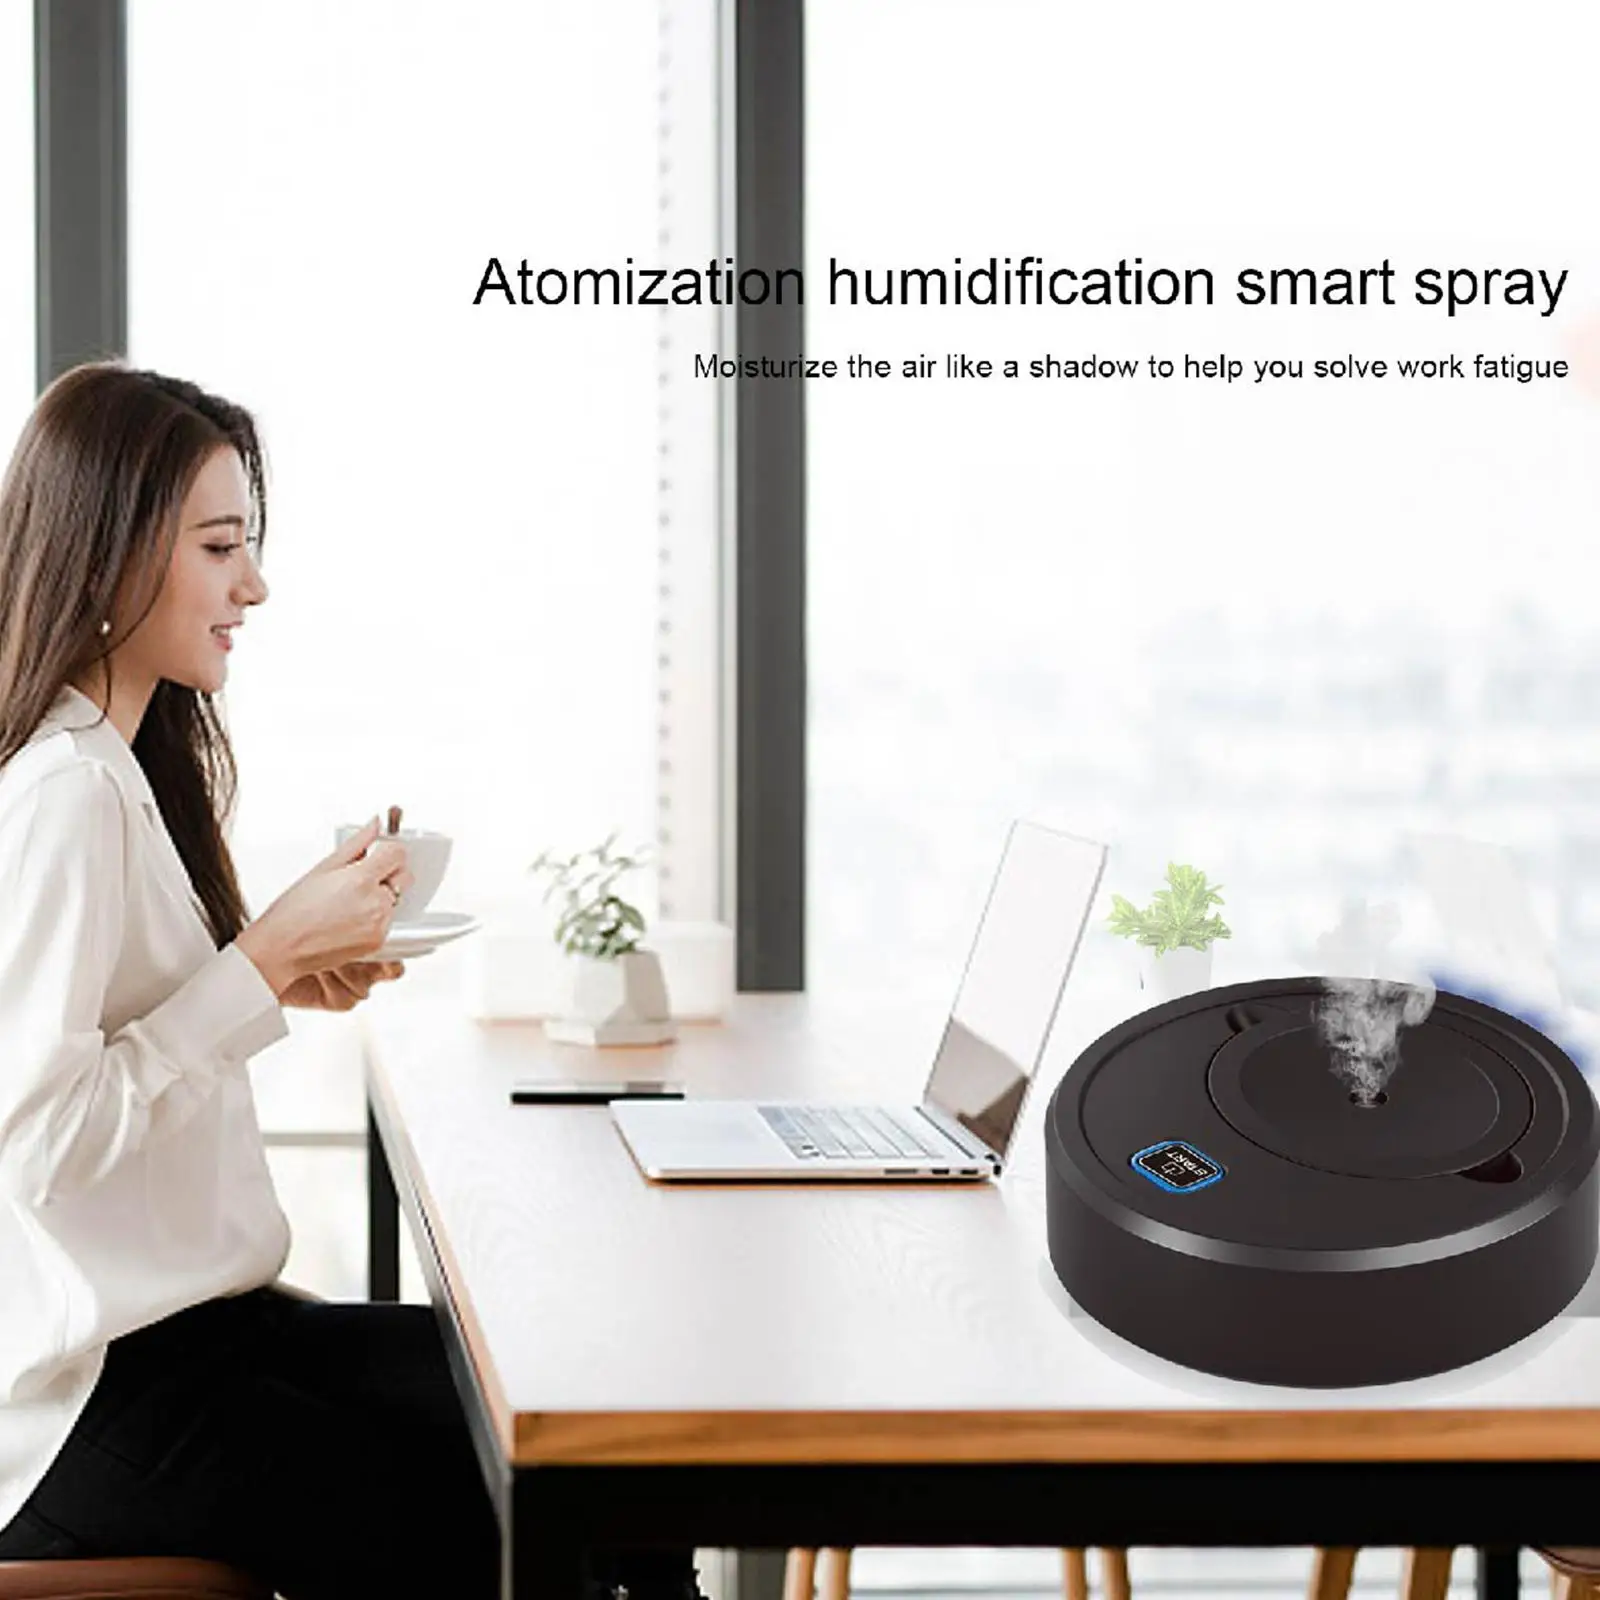 3 in 1 Smart Sweeping Robot 170ml Water Tank UV Disinfection Air Humidifiers Vacuum Cleaner for Home Office Bedroom Living Room